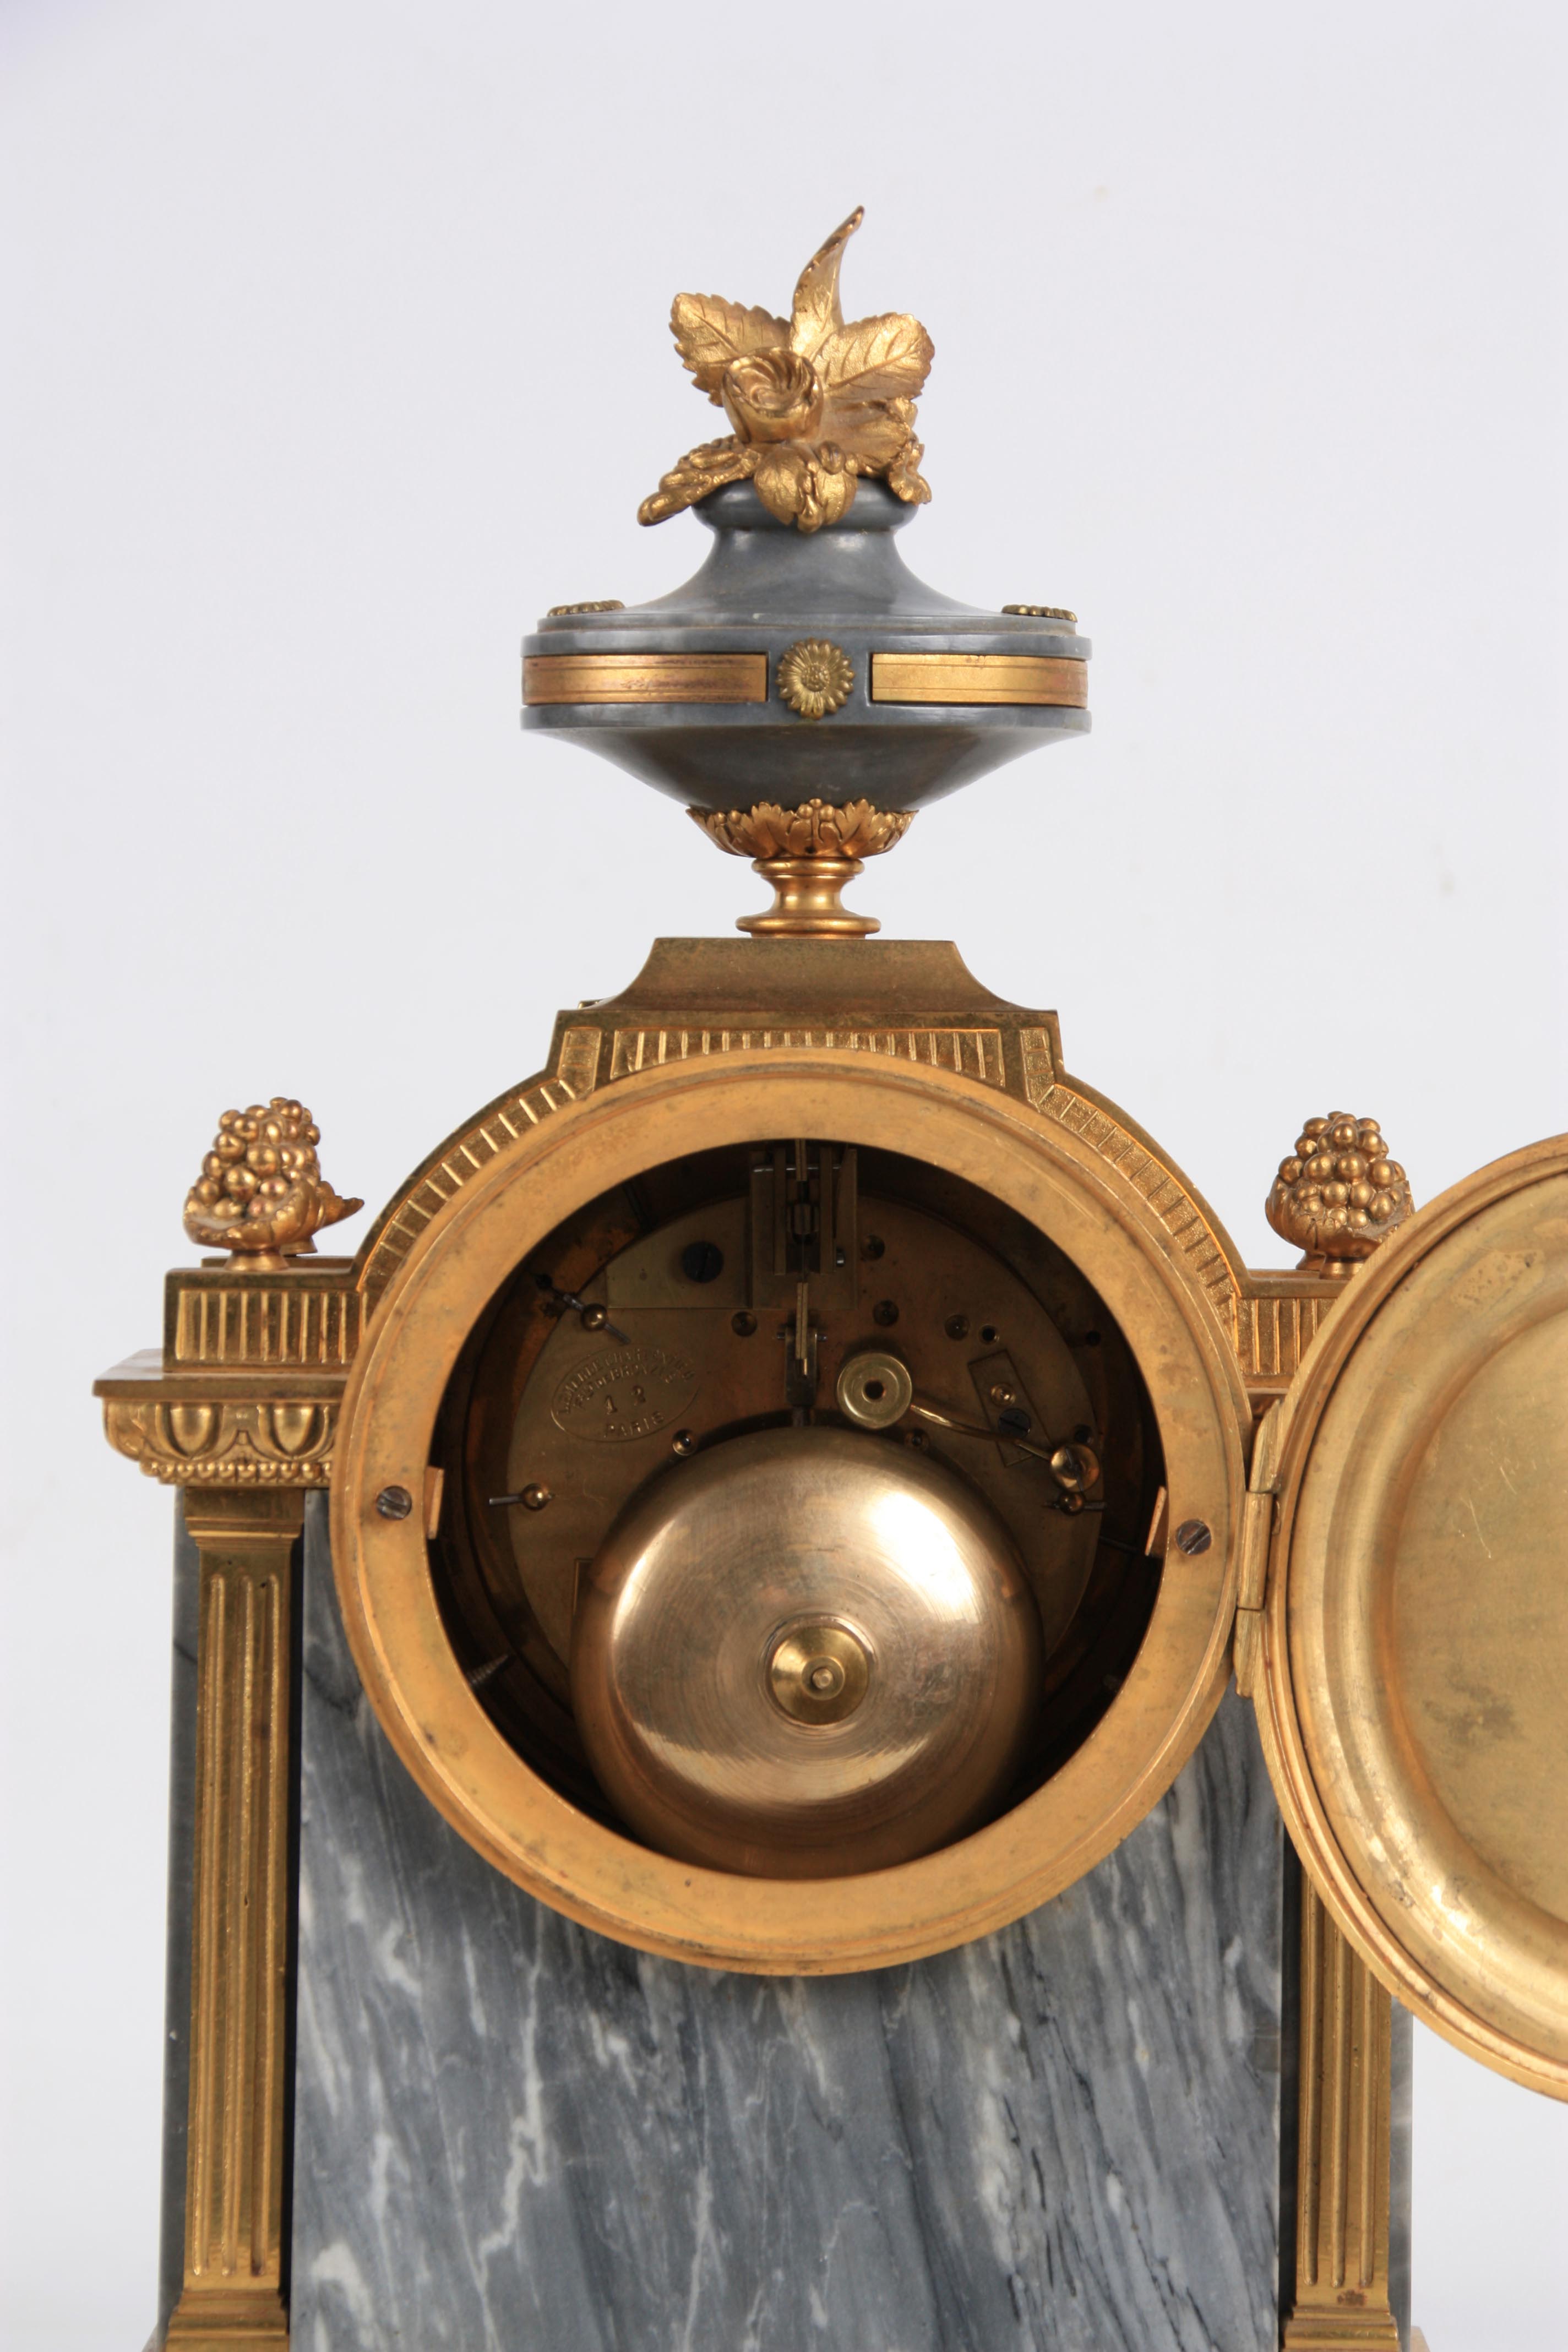 LEMERLE-CHARPENTIER & CIE, PARIS A MID 19TH CENTURY FRENCH MARBLE AND ORMOLU CLOCK GARNITURE the - Image 10 of 14